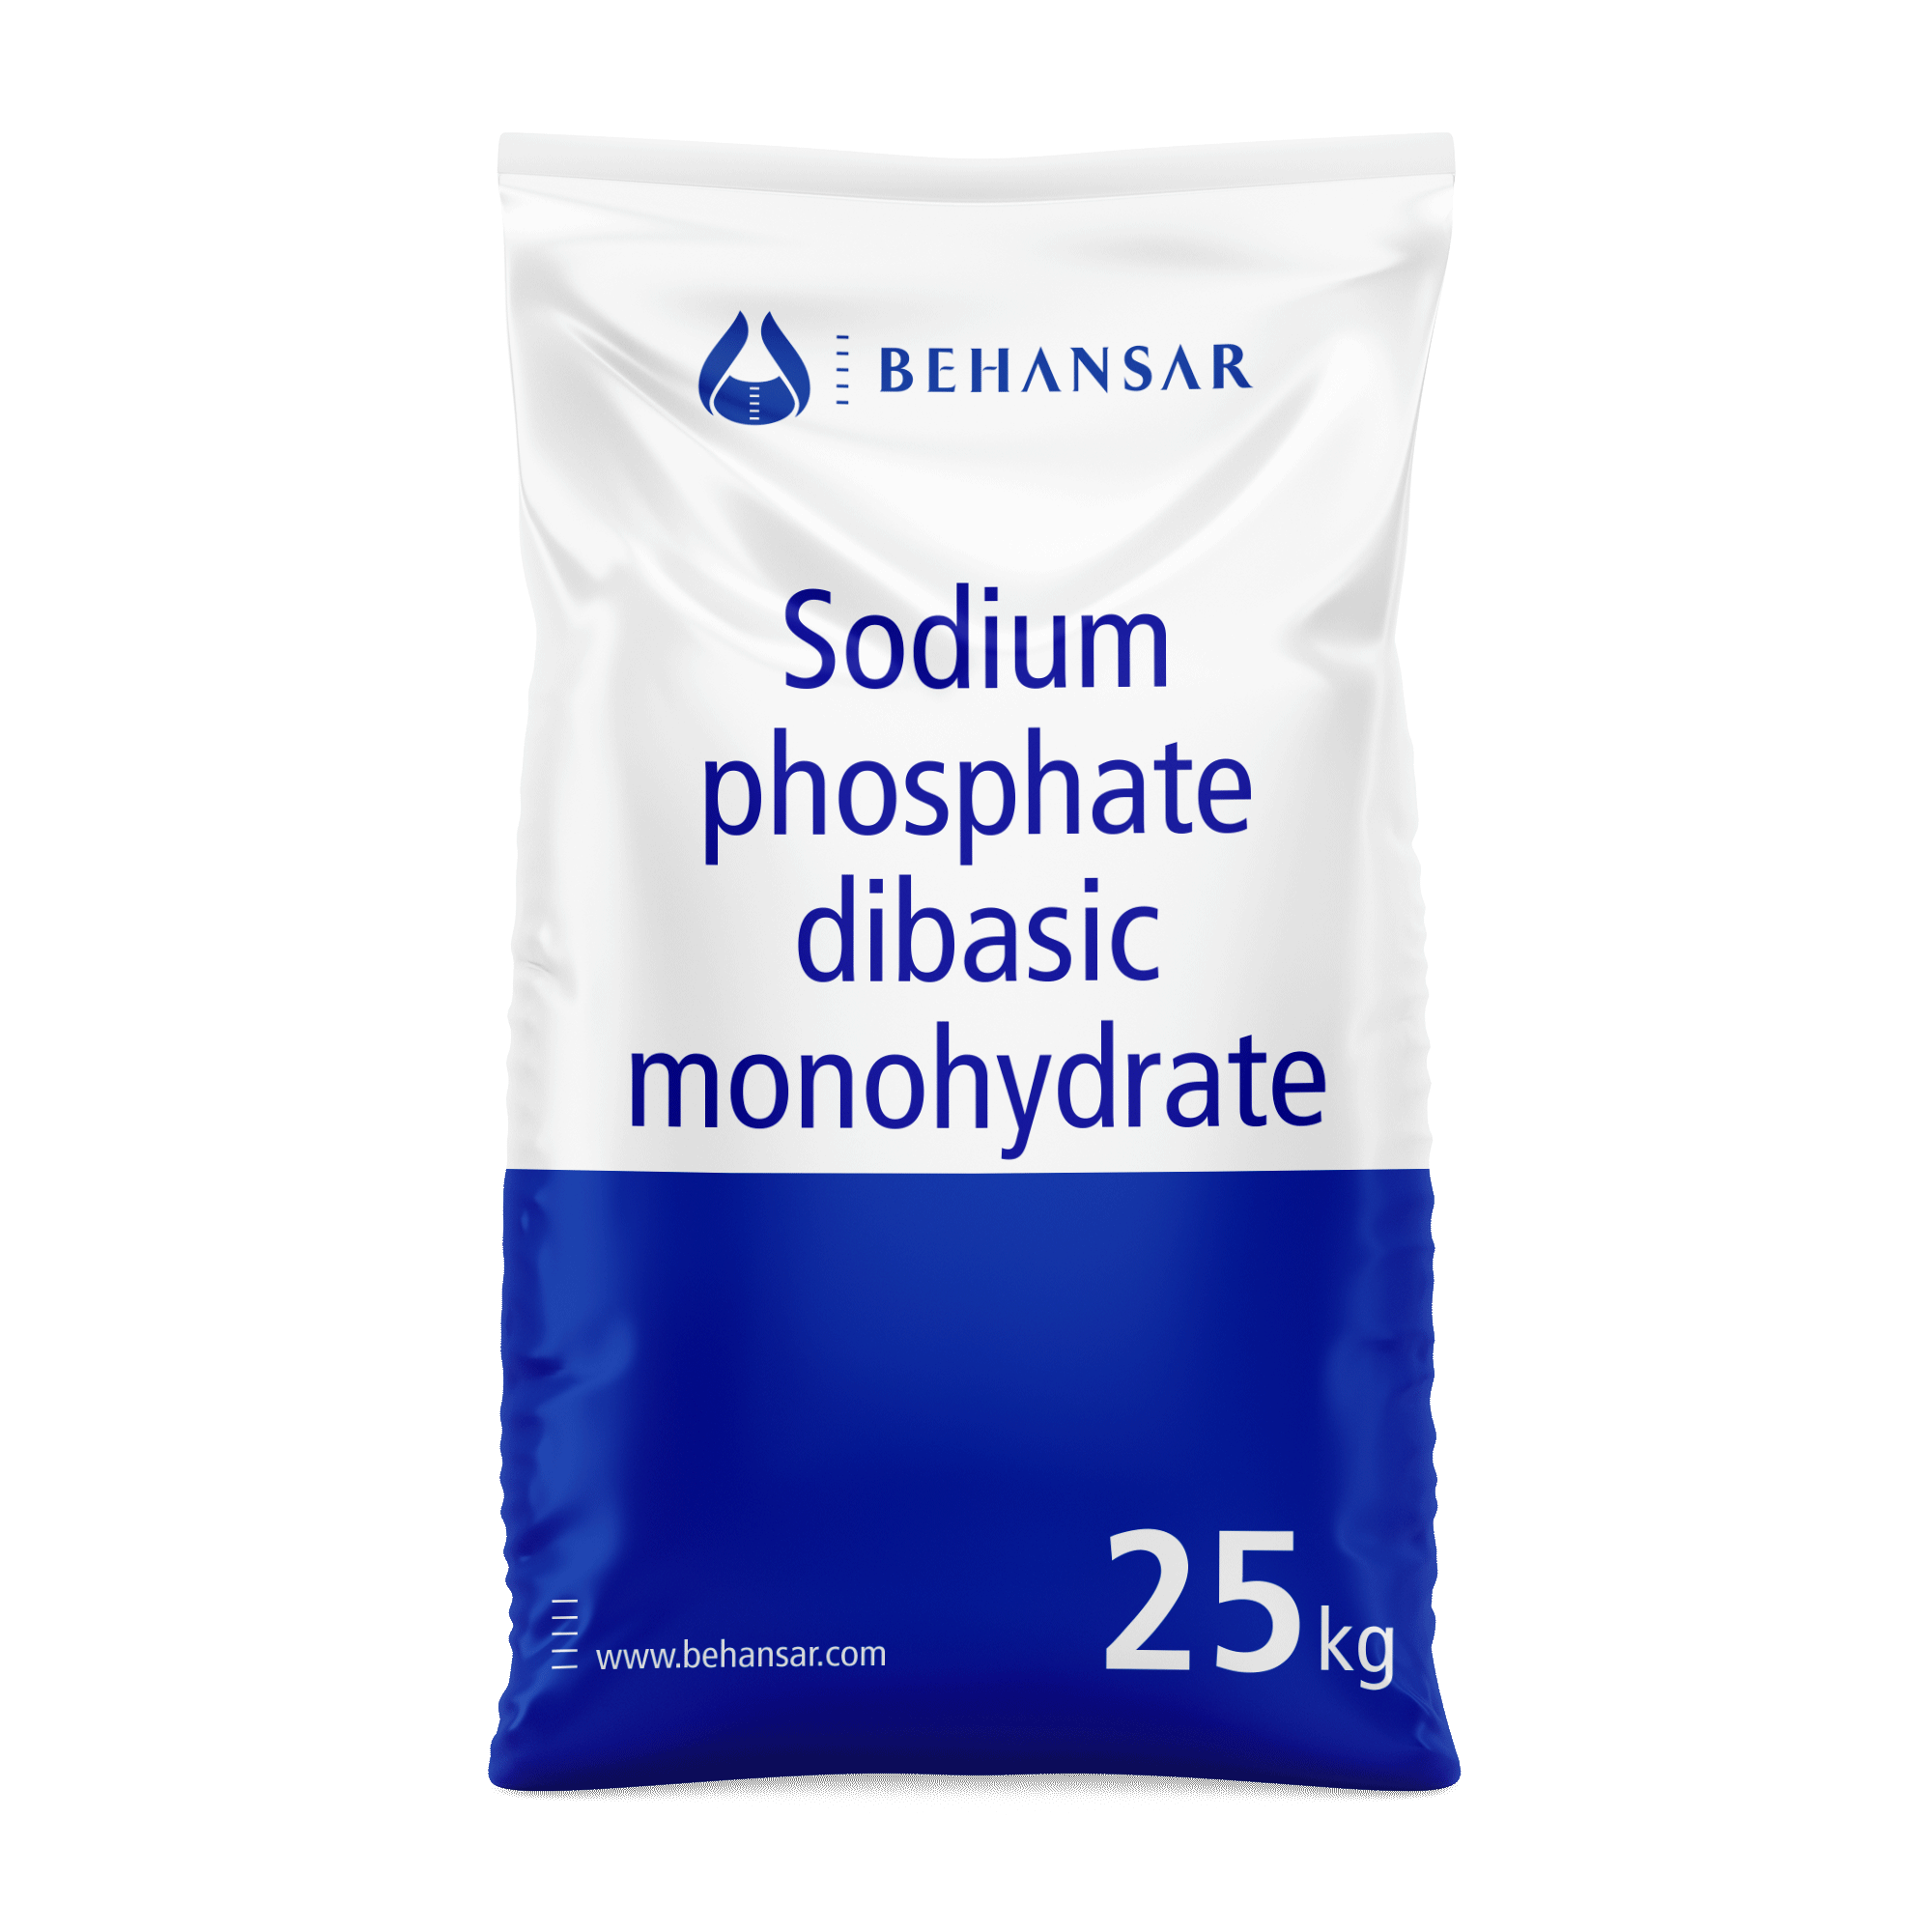 Sodium phosphate dibasic monohydrate is one of the products of Behansar Co